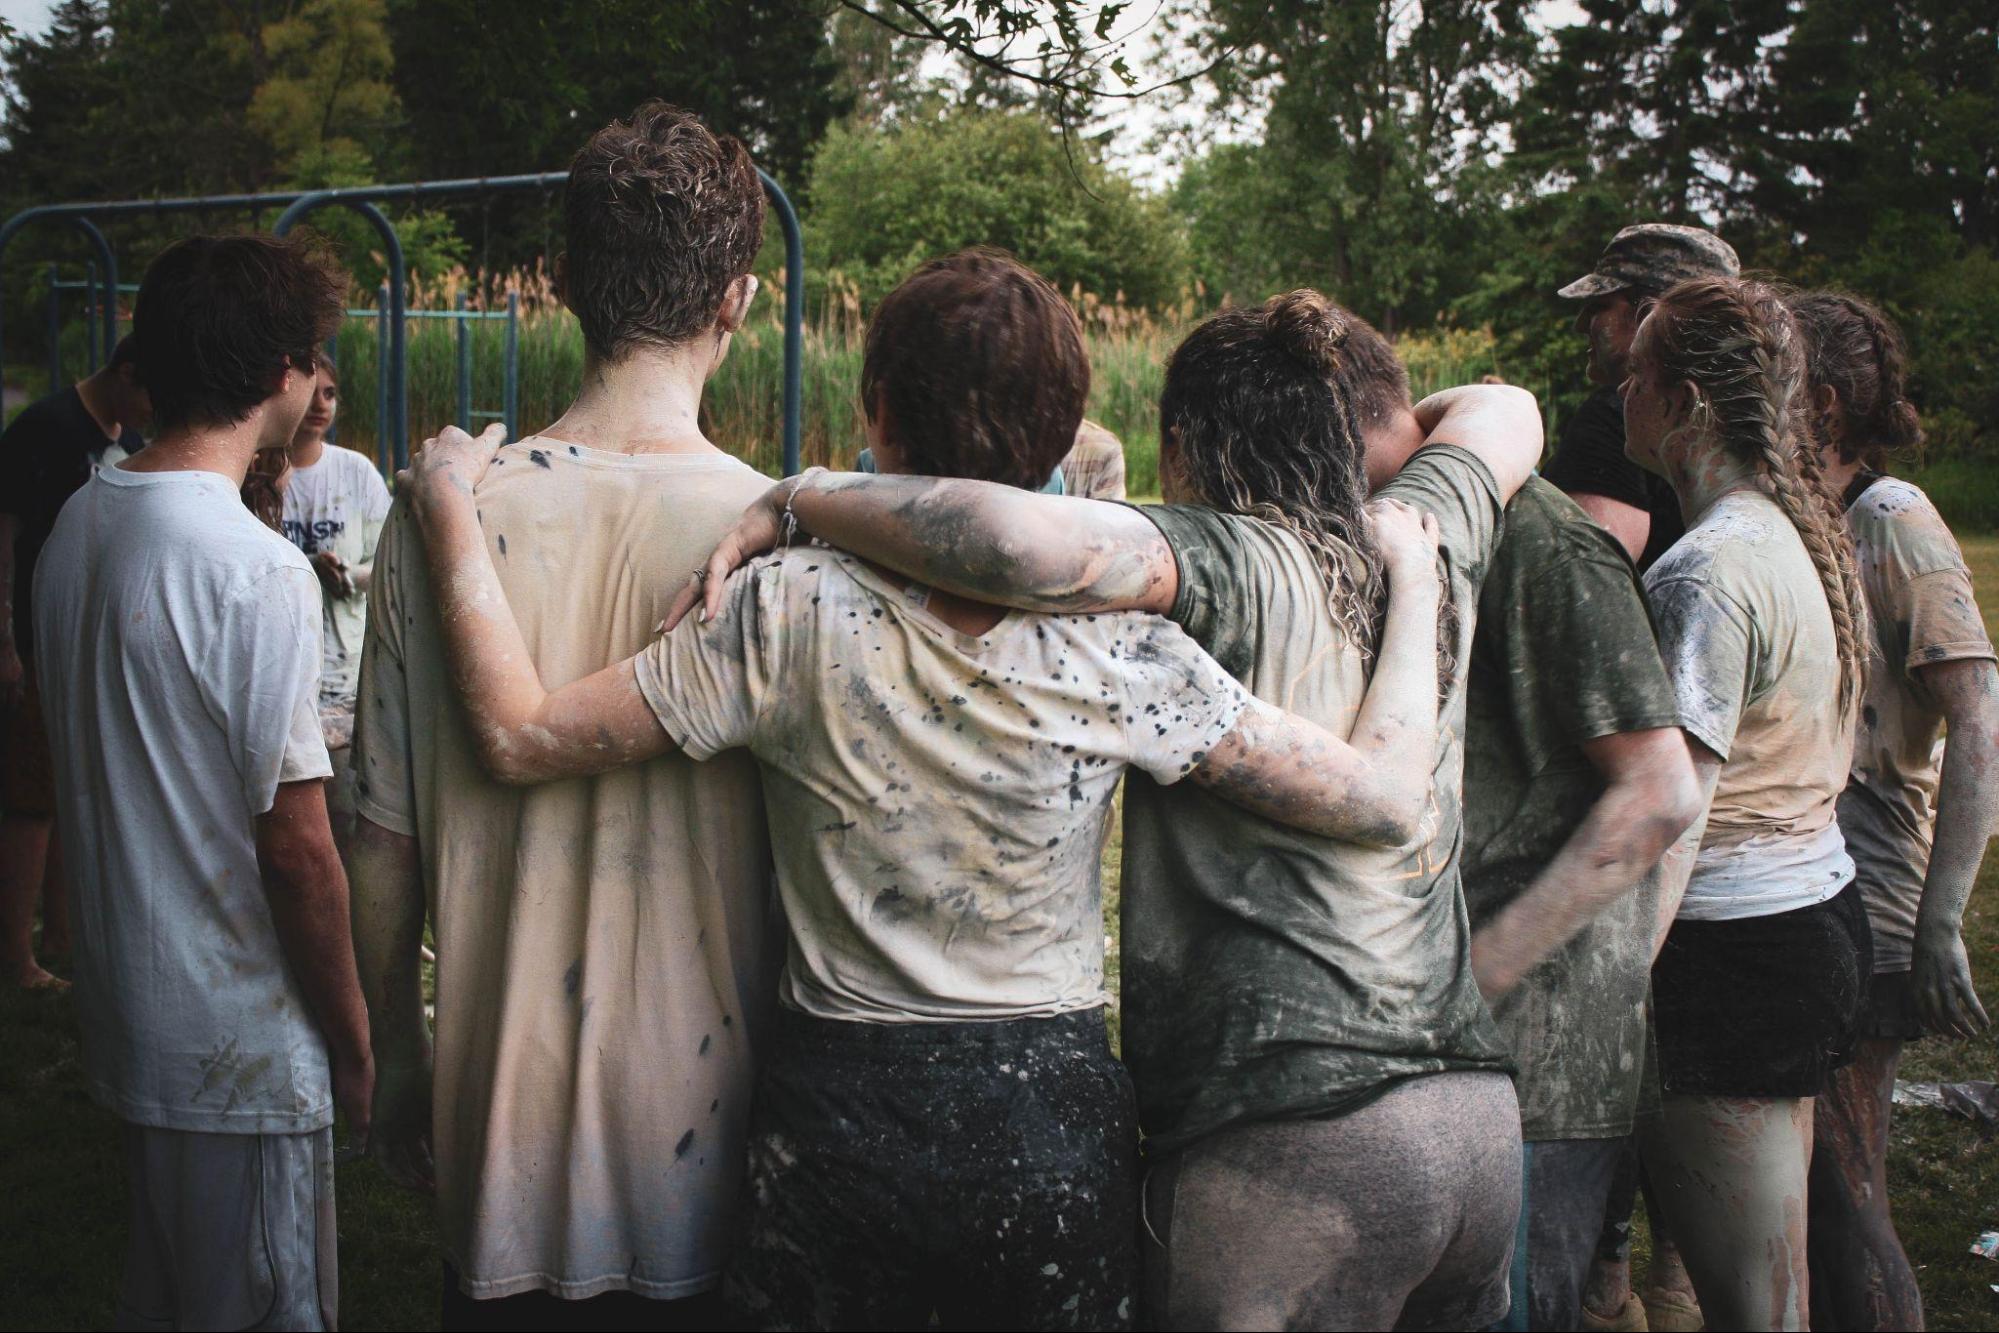 The back view of a group of teens standing with arms around each other